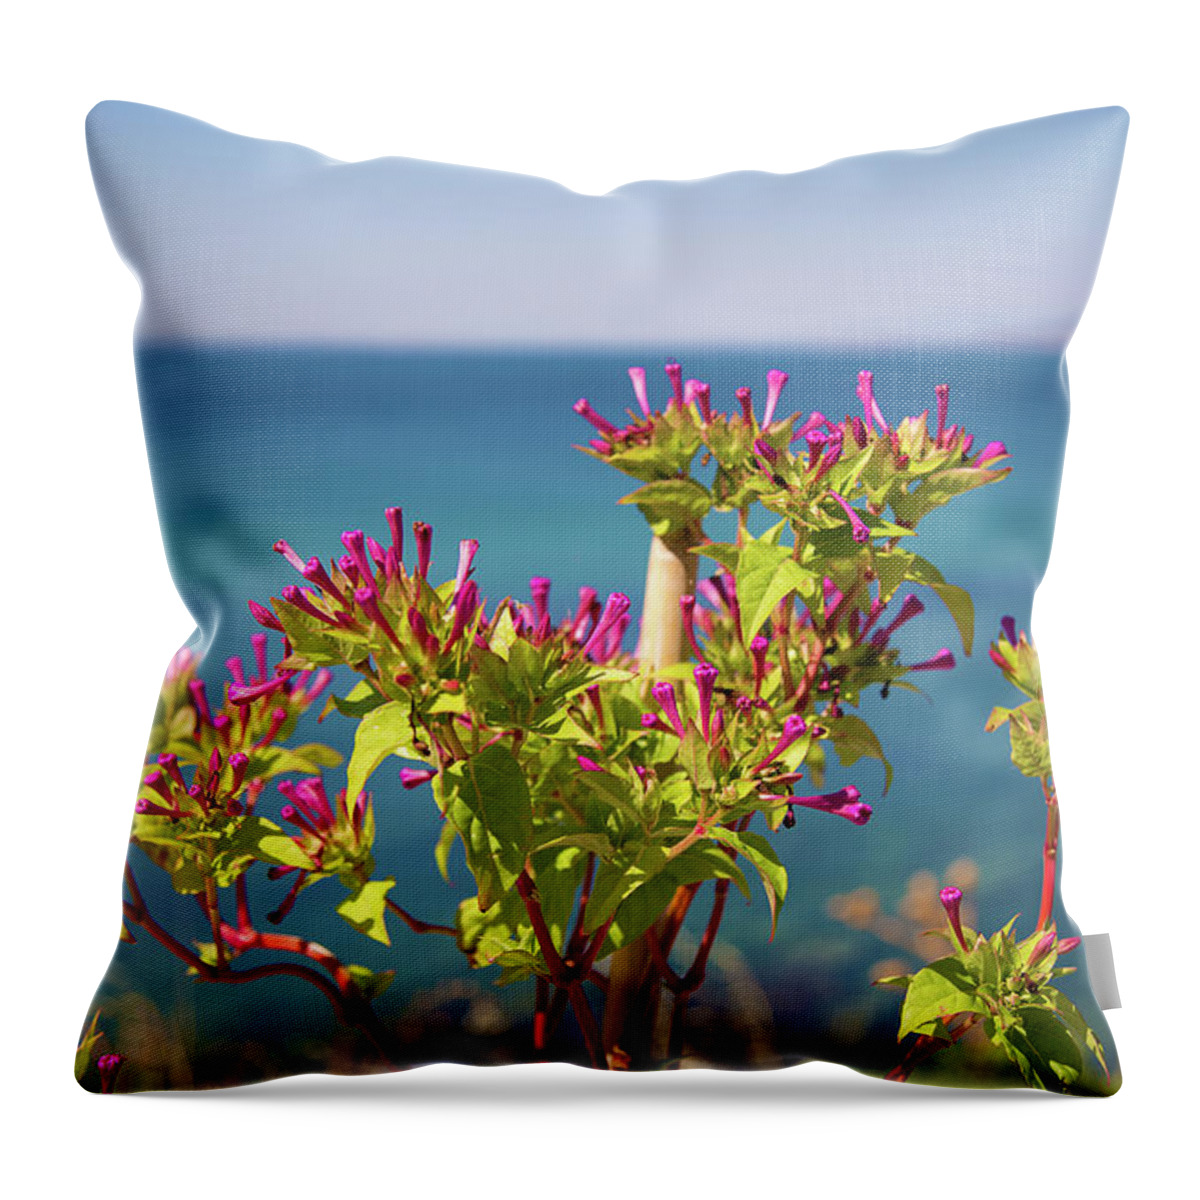 Floral Beauties Throw Pillow featuring the photograph Tiny Beauties by Milena Ilieva